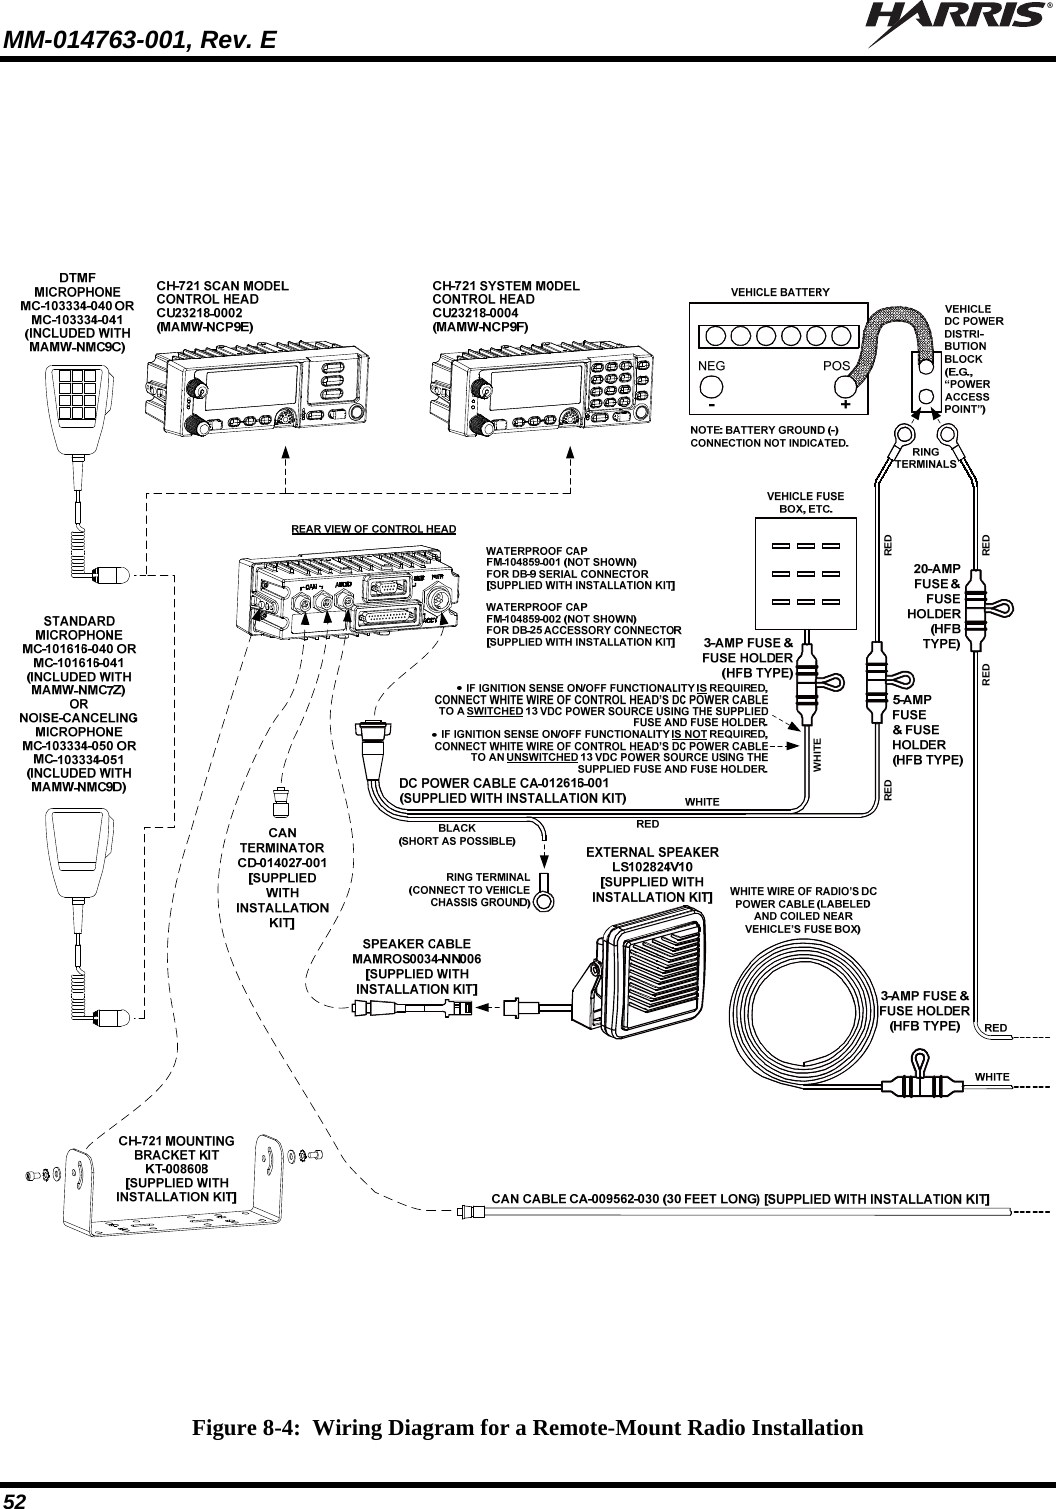 MM-014763-001, Rev. E   52 RED REDREDWHITERED Figure 8-4:  Wiring Diagram for a Remote-Mount Radio Installation 